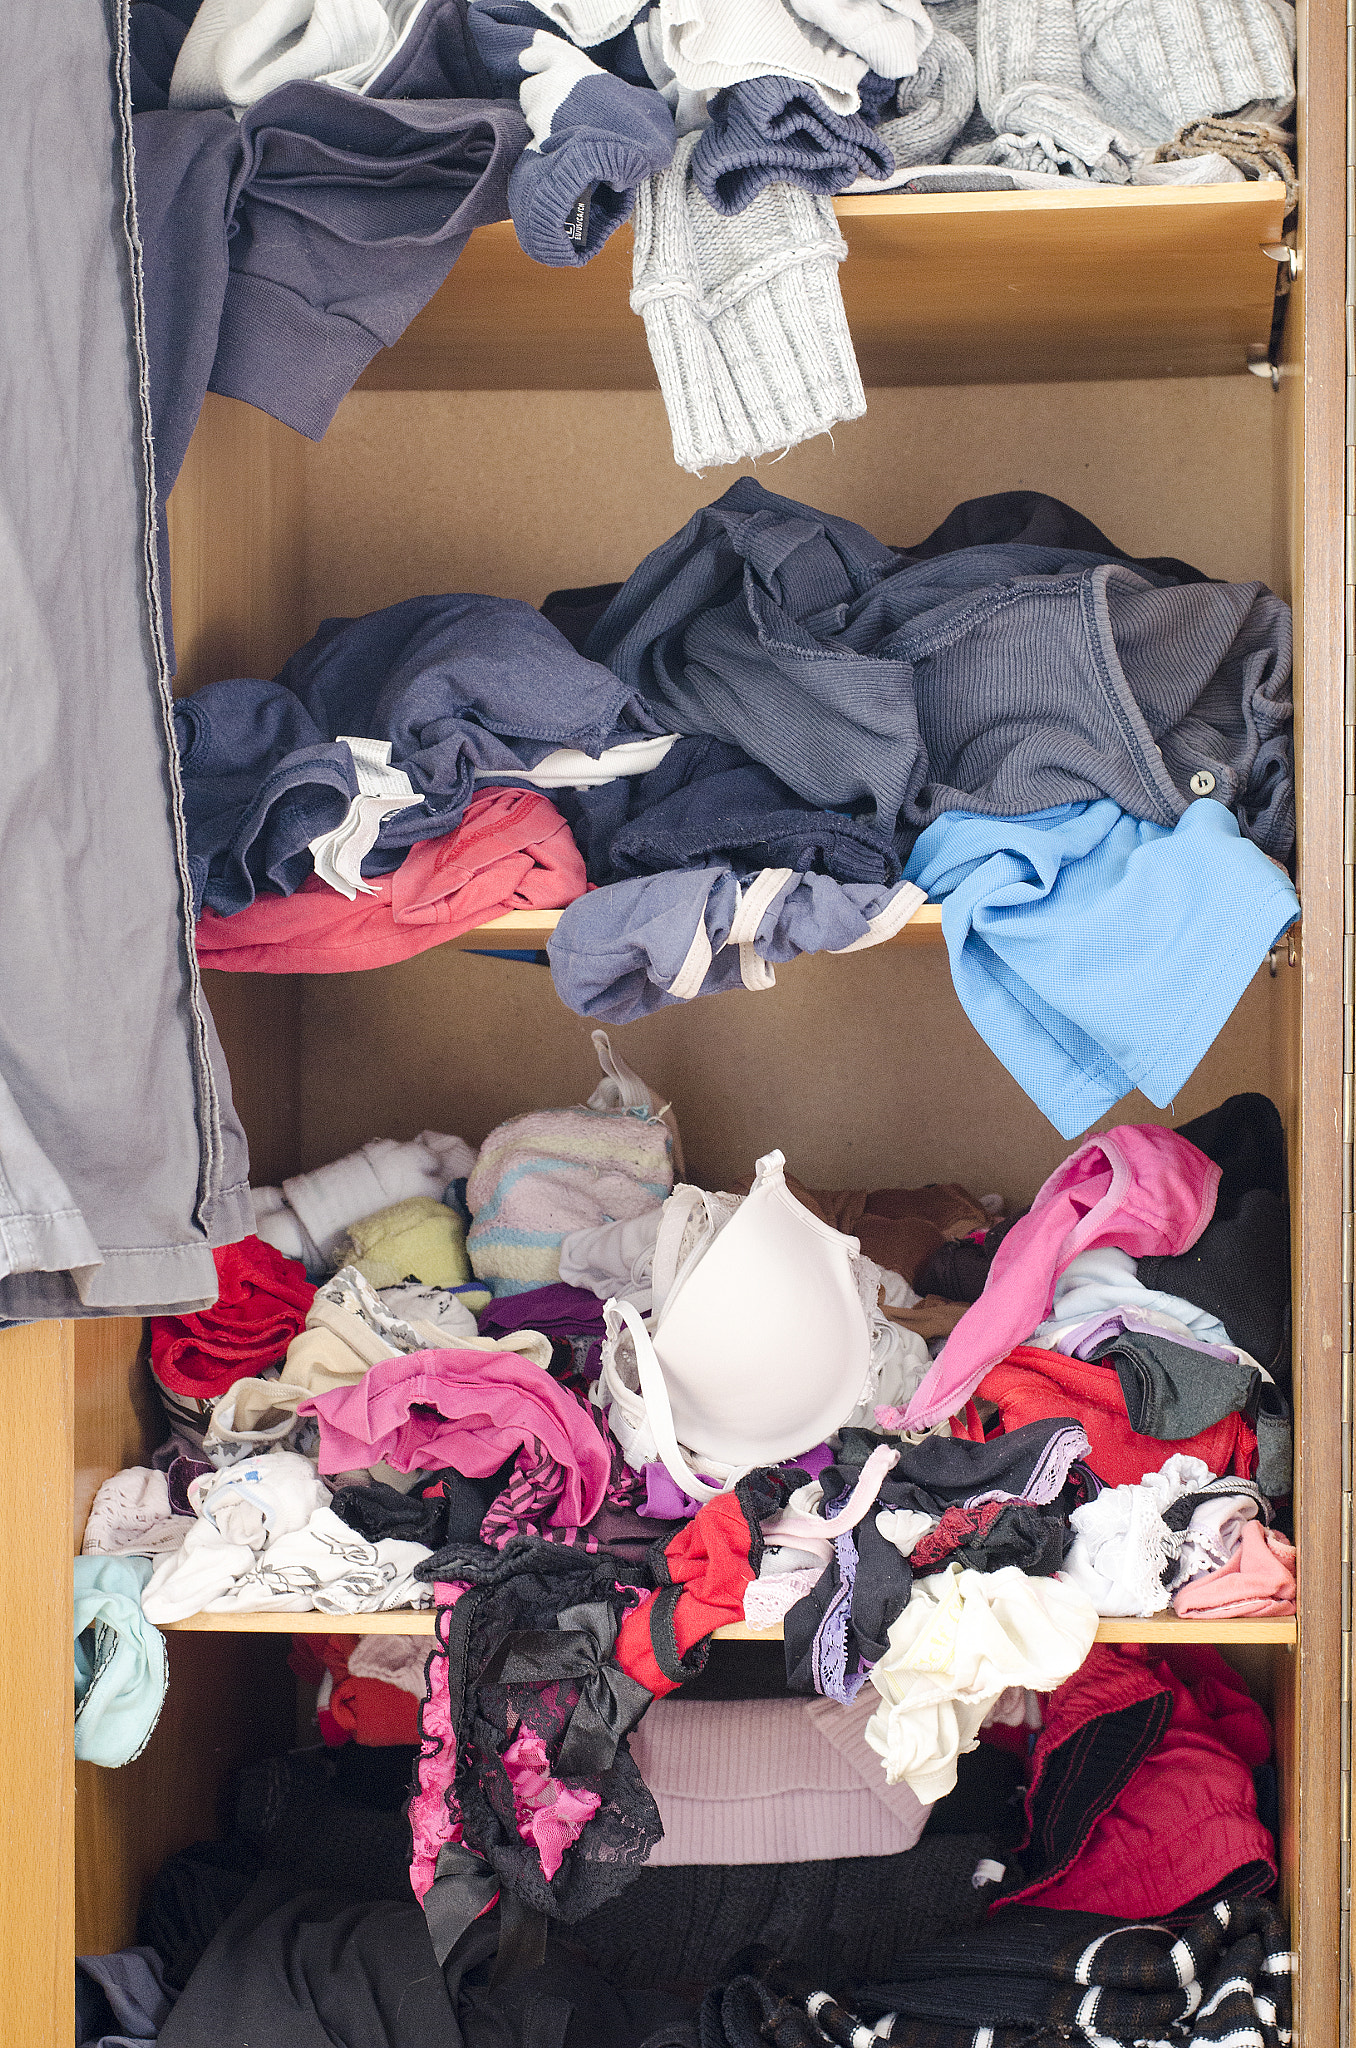 Nikon D5100 sample photo. Pile of carelessly scattered clothes in wardrobe photography